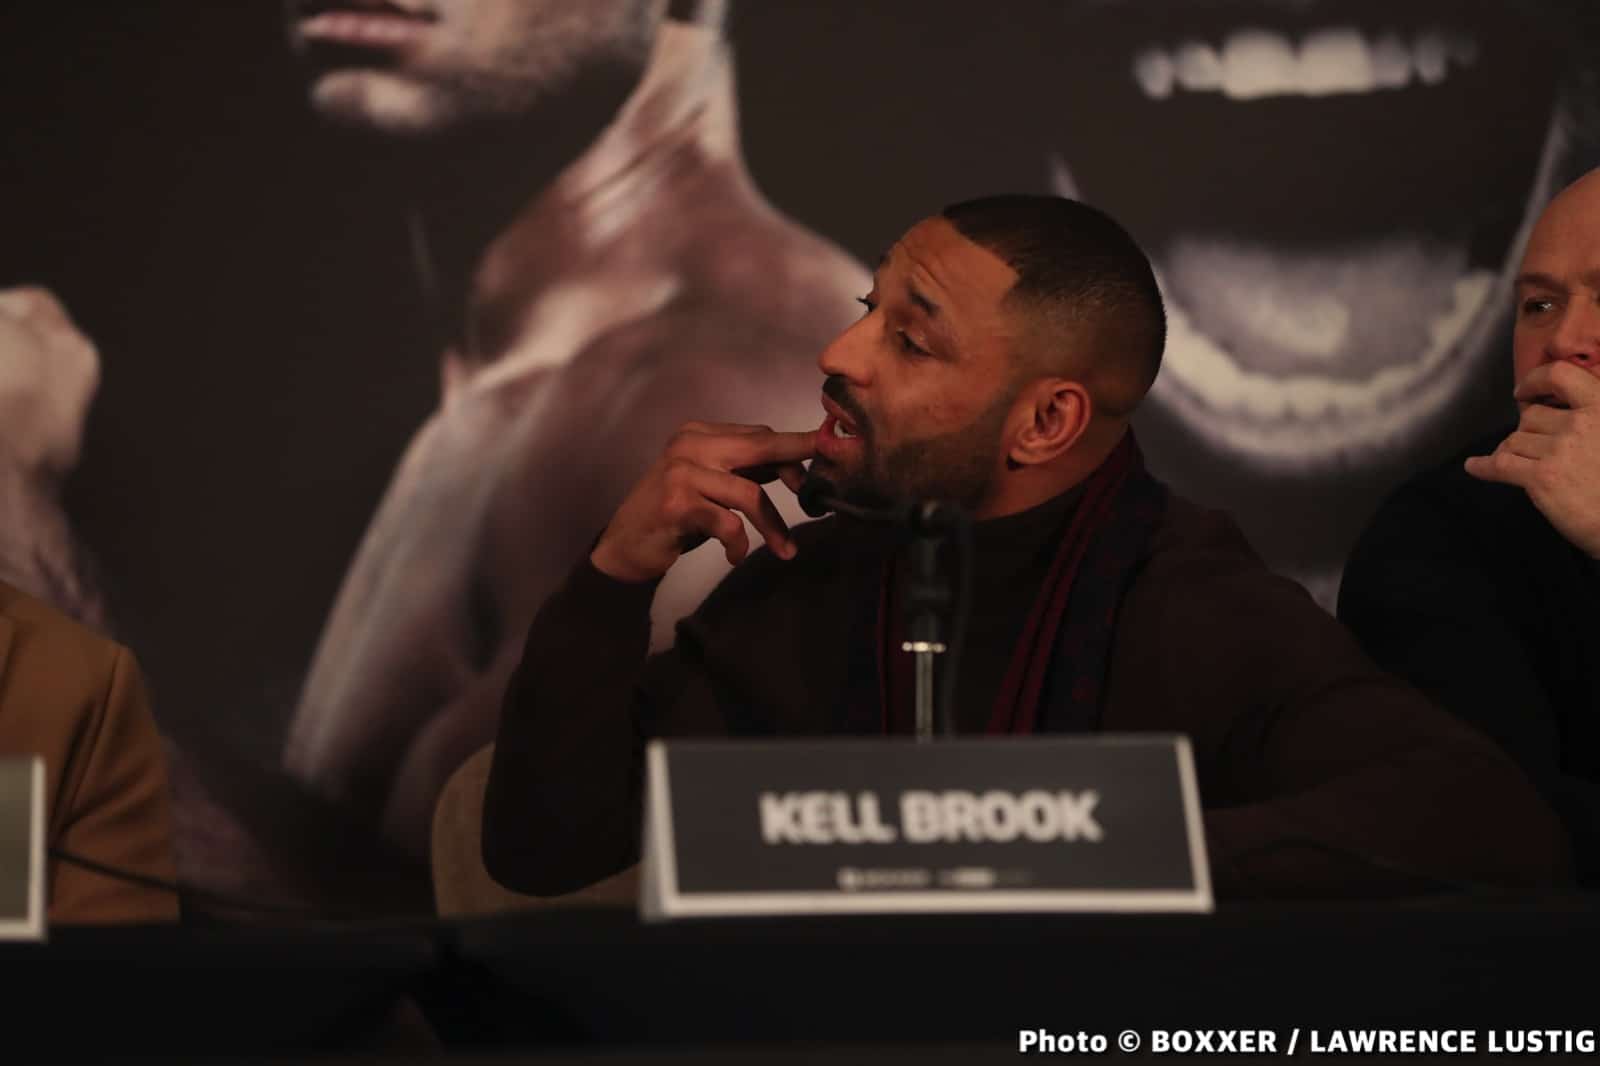 Image: Amir Khan vs. Kell Brook on Feb.19th in Manchester, England